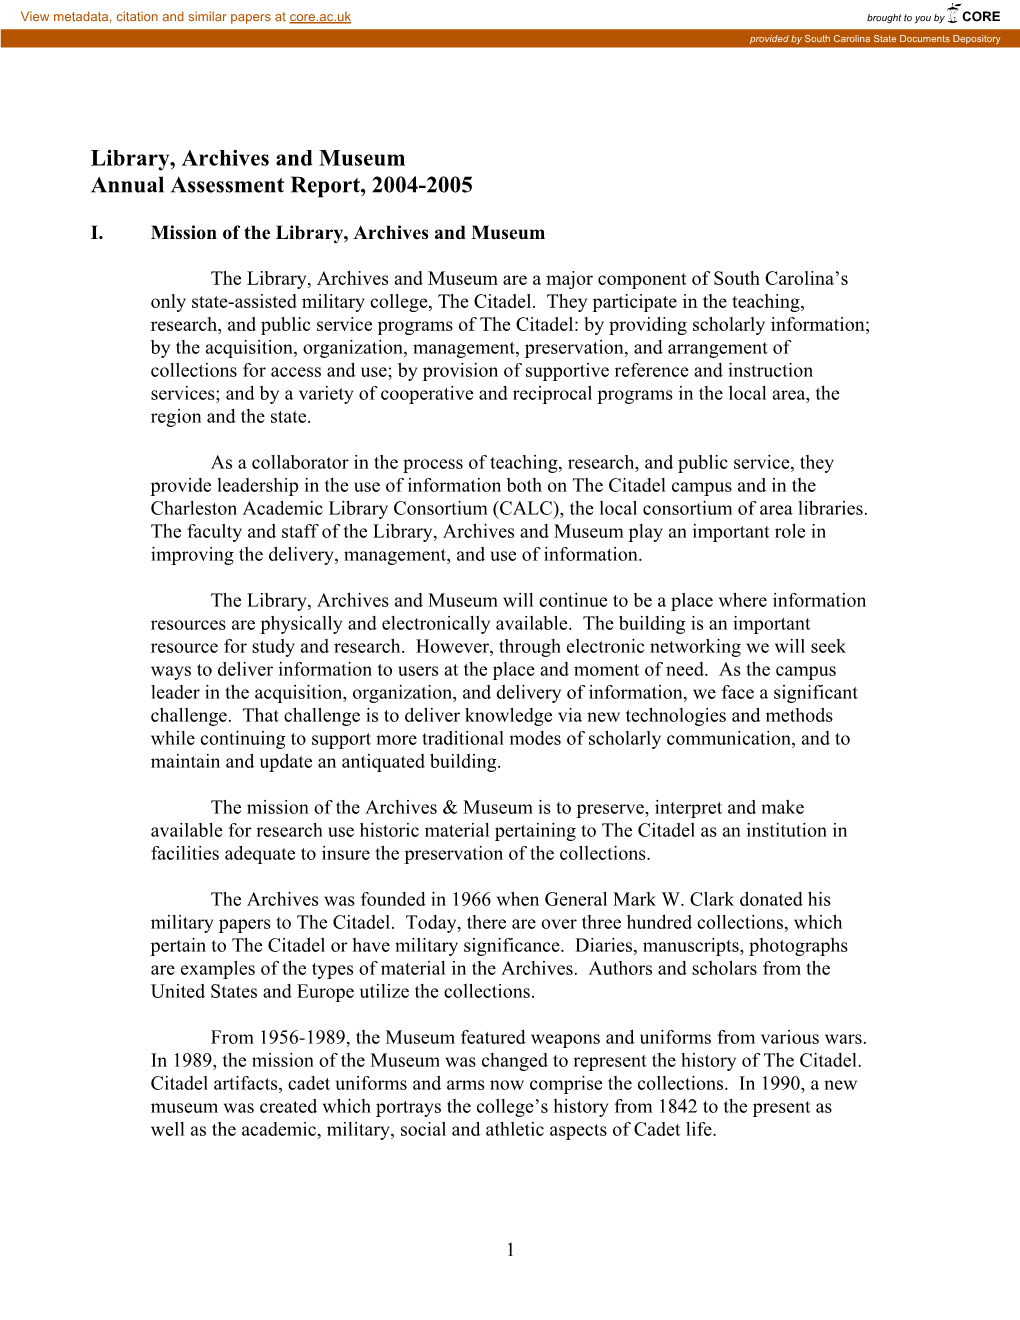 Library, Archives and Museum Annual Assessment Report, 2004-2005